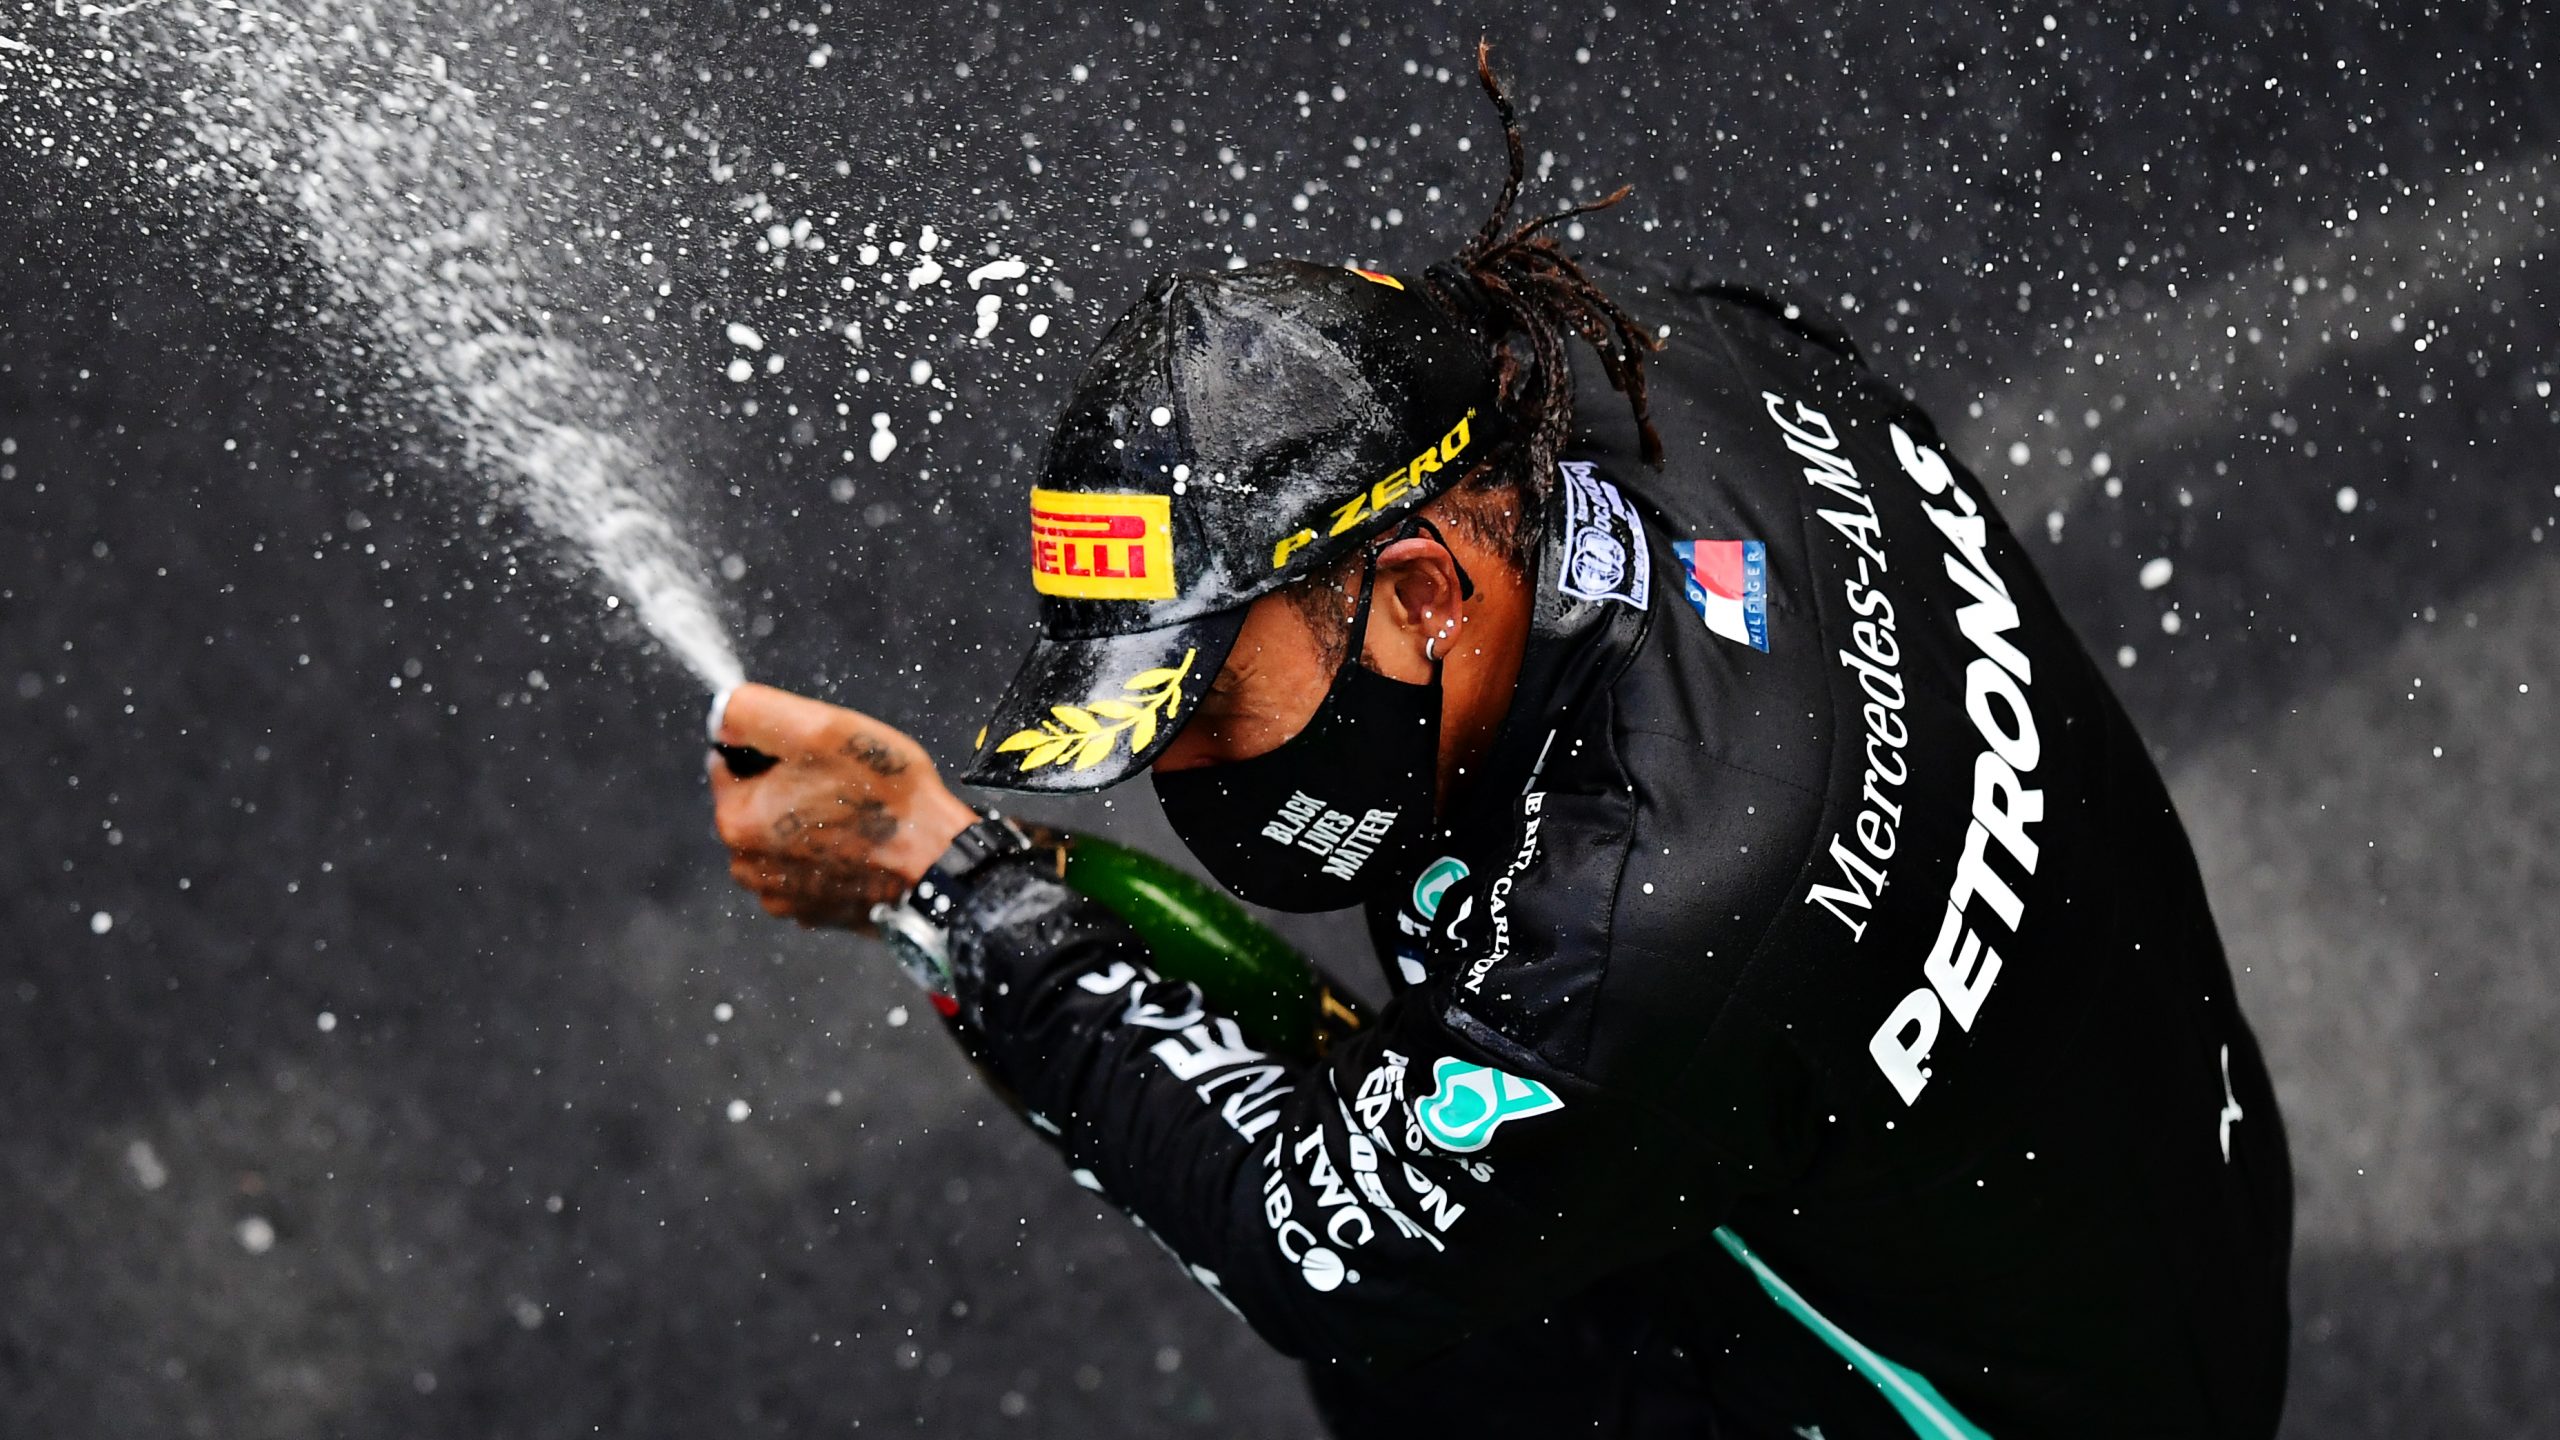 Professional racing driver Lewis Hamilton celebrates a Formula 1 victory with champagne on the podium